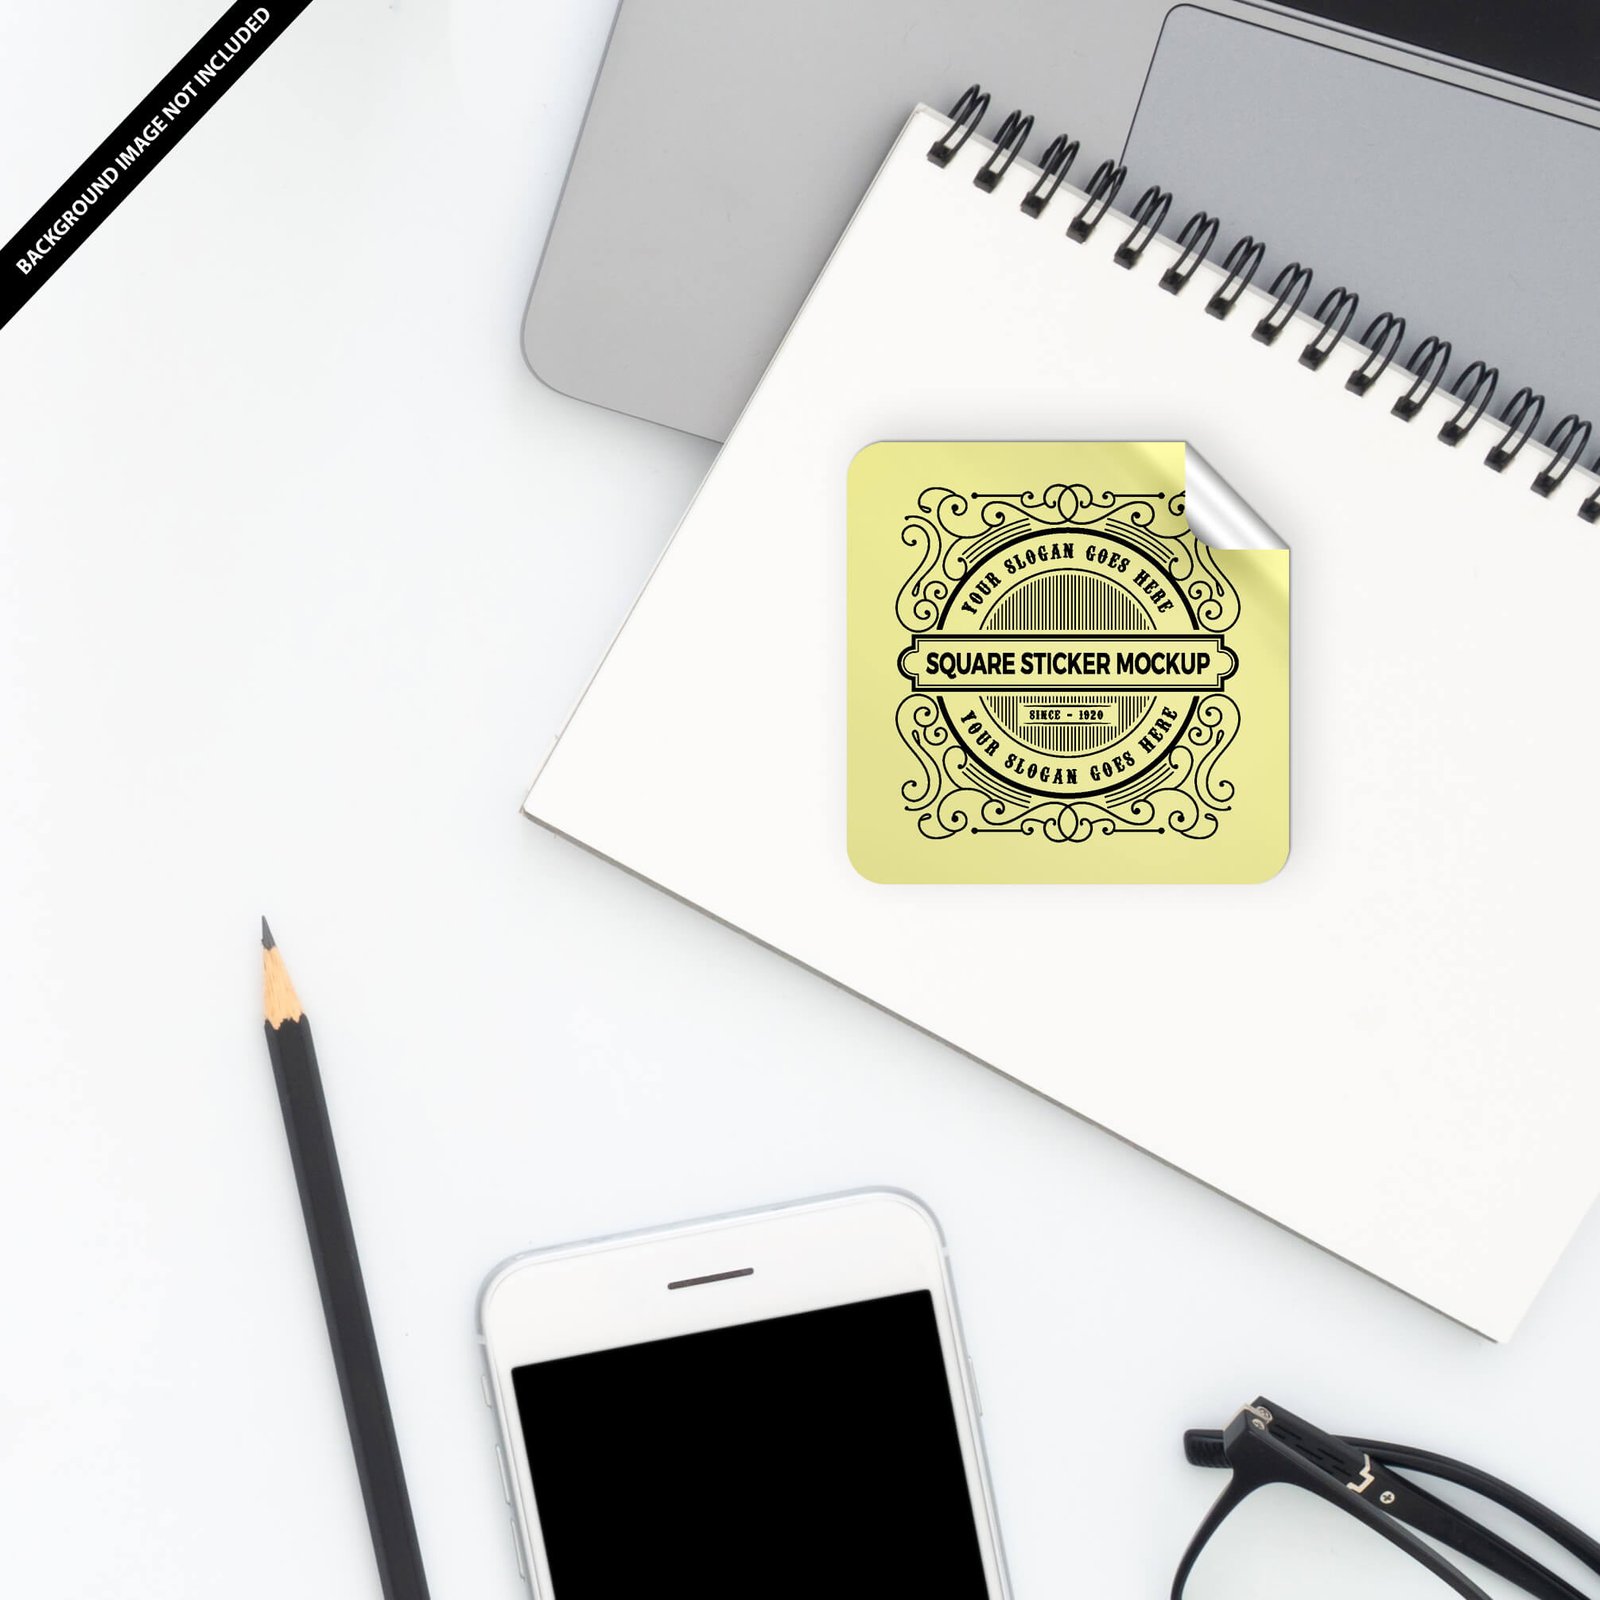 Free Square Sticker On a Notebook Mockup PSD Template